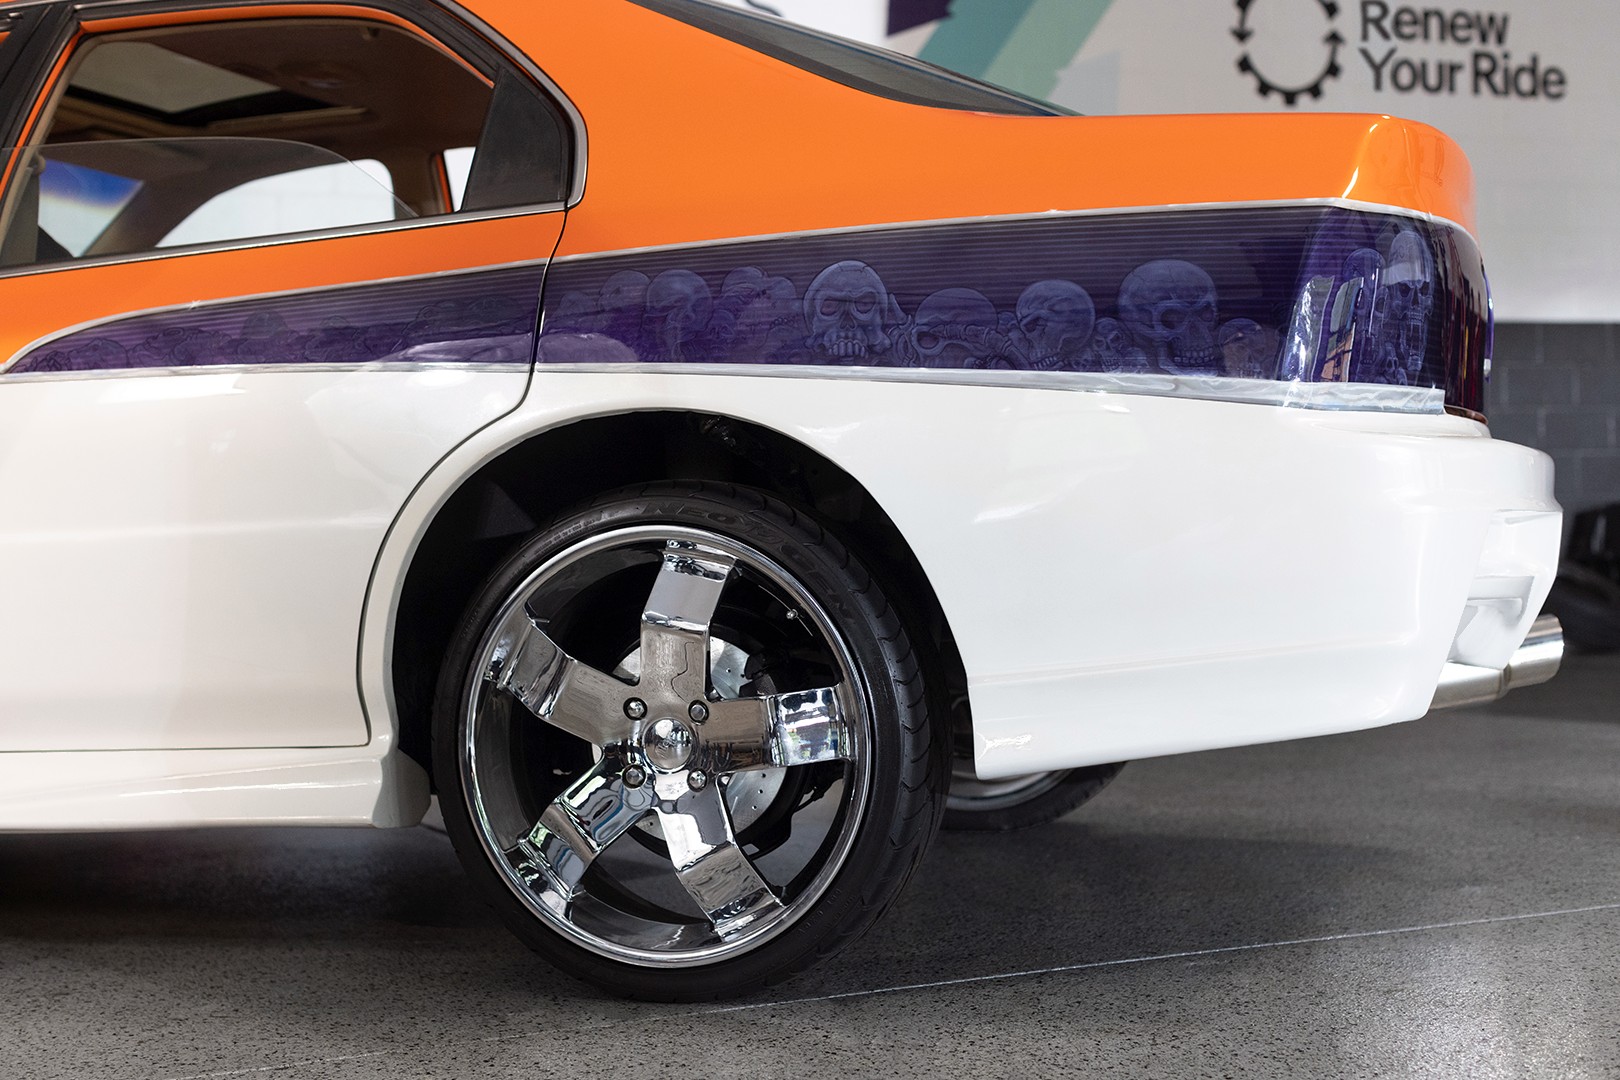 t-pain's tricked-out 1994 honda accord in the ebay motors garage